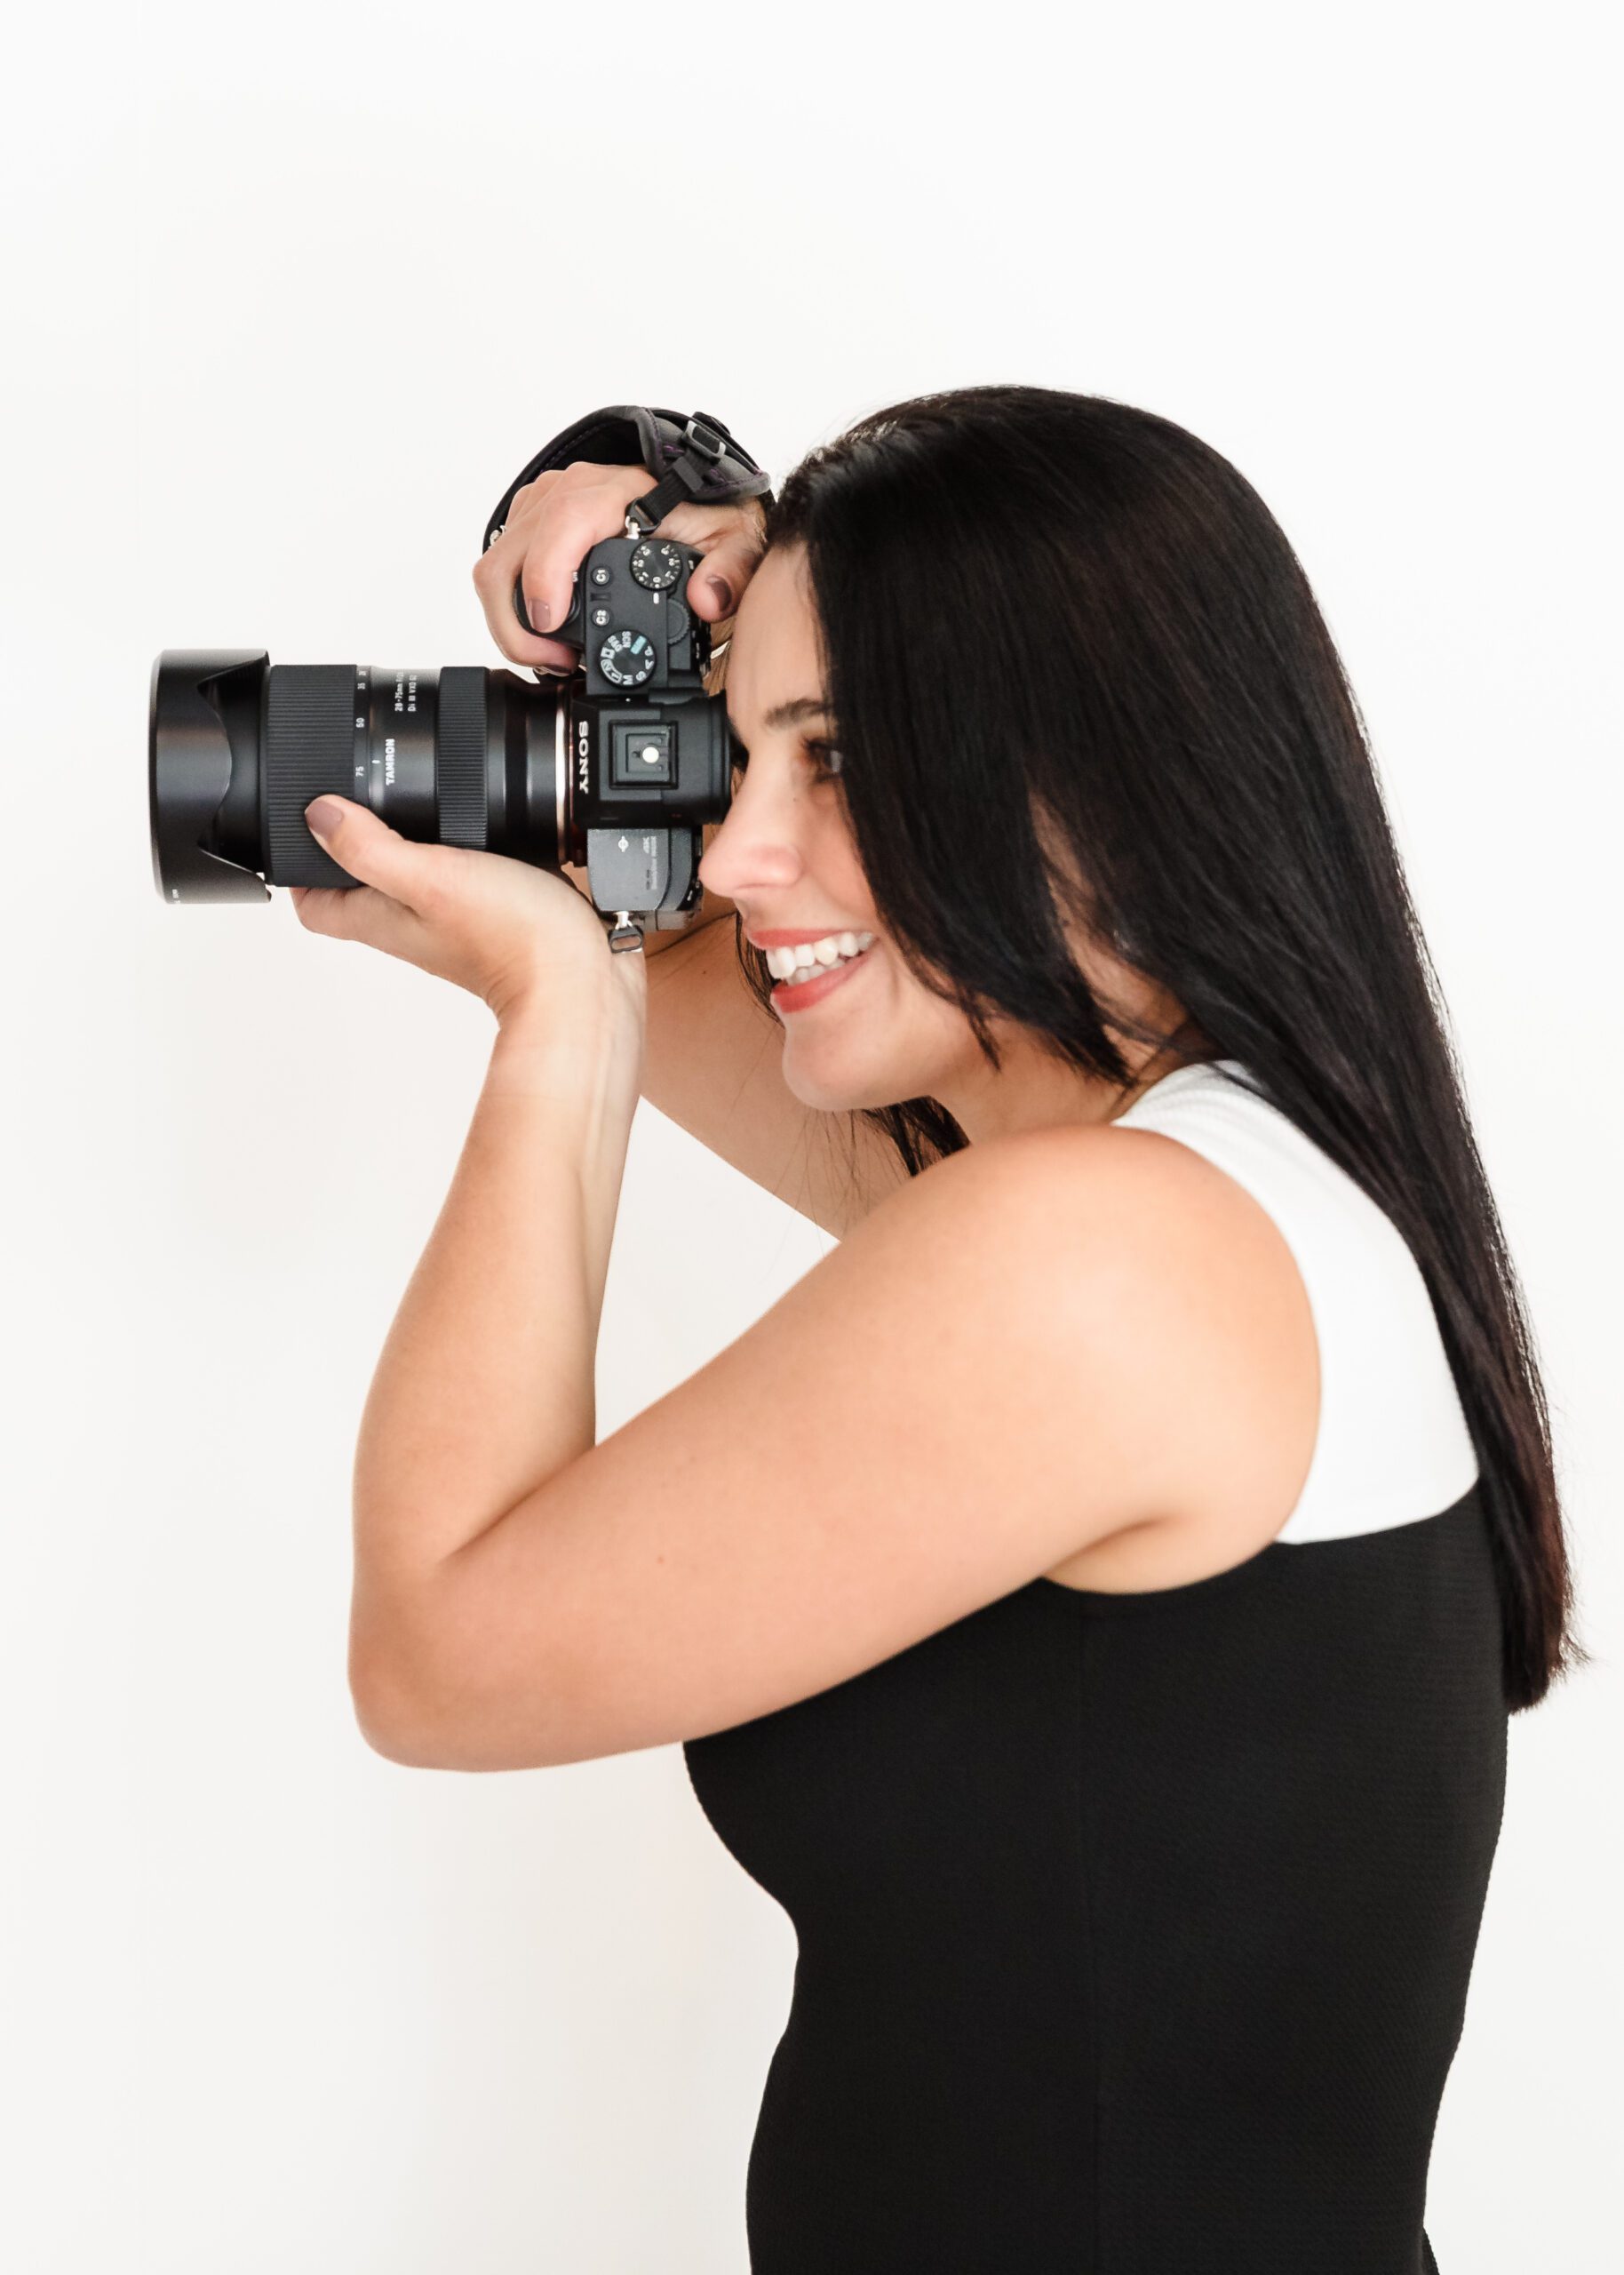 photographer with camera close to her face